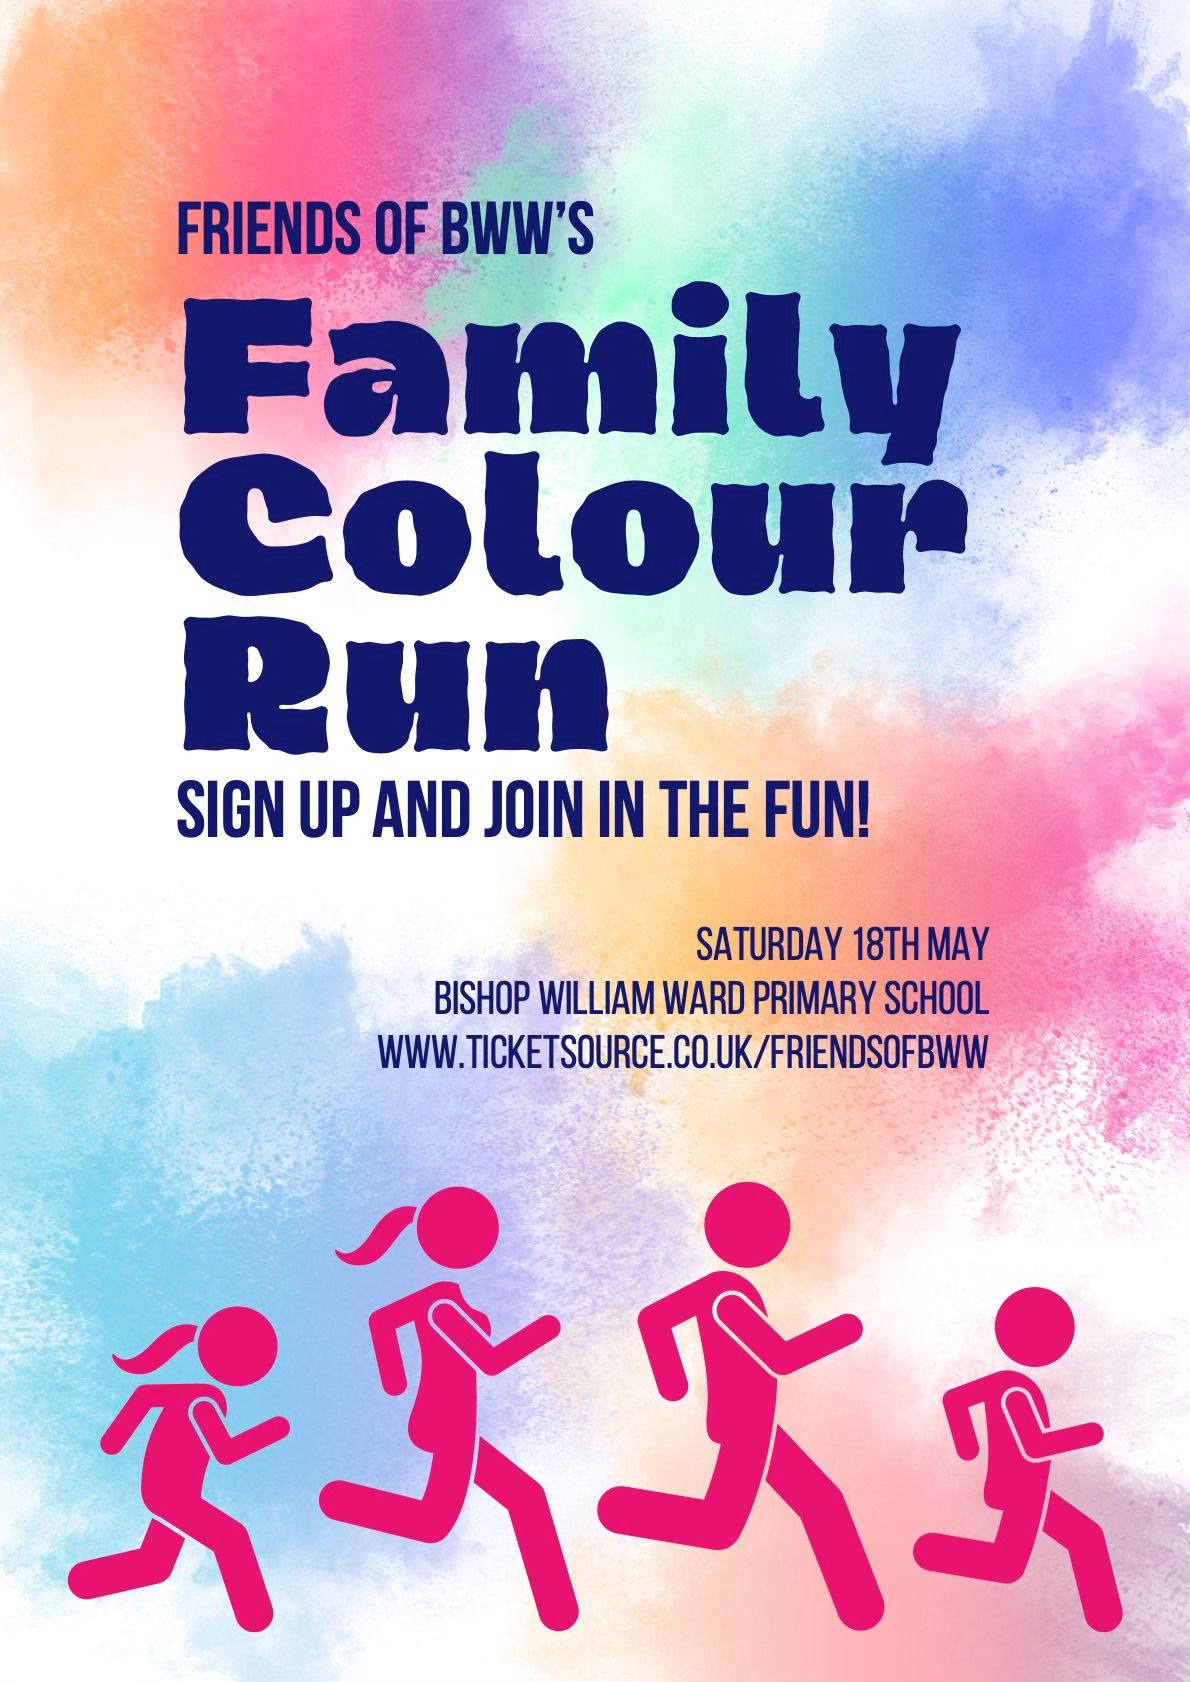 Family Colour Run by Friends of BWW